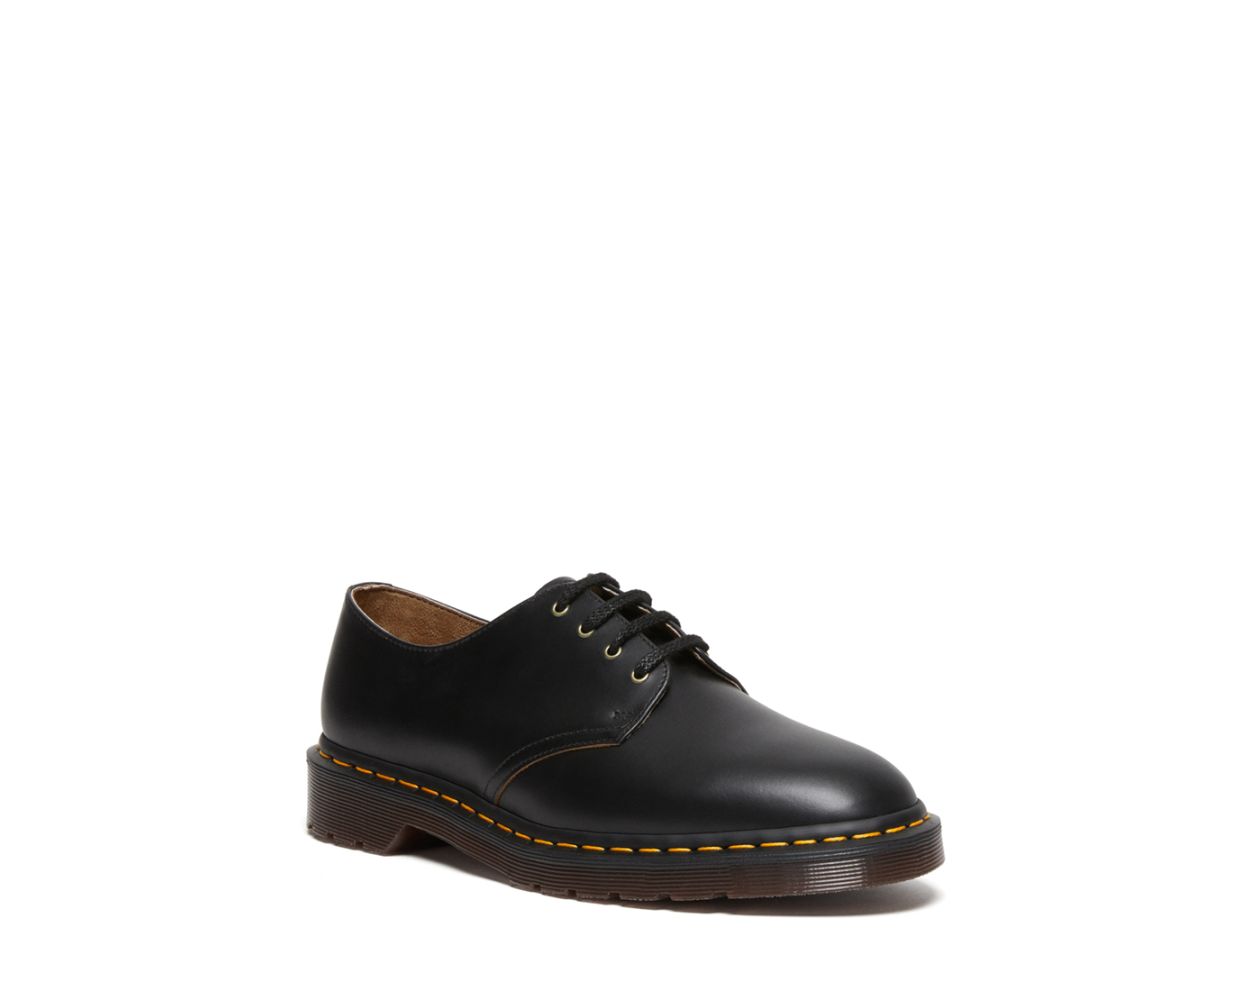 Dr. Martens Smiths Vintage Smooth Leather Dress Shoes in Black | NEON Canada